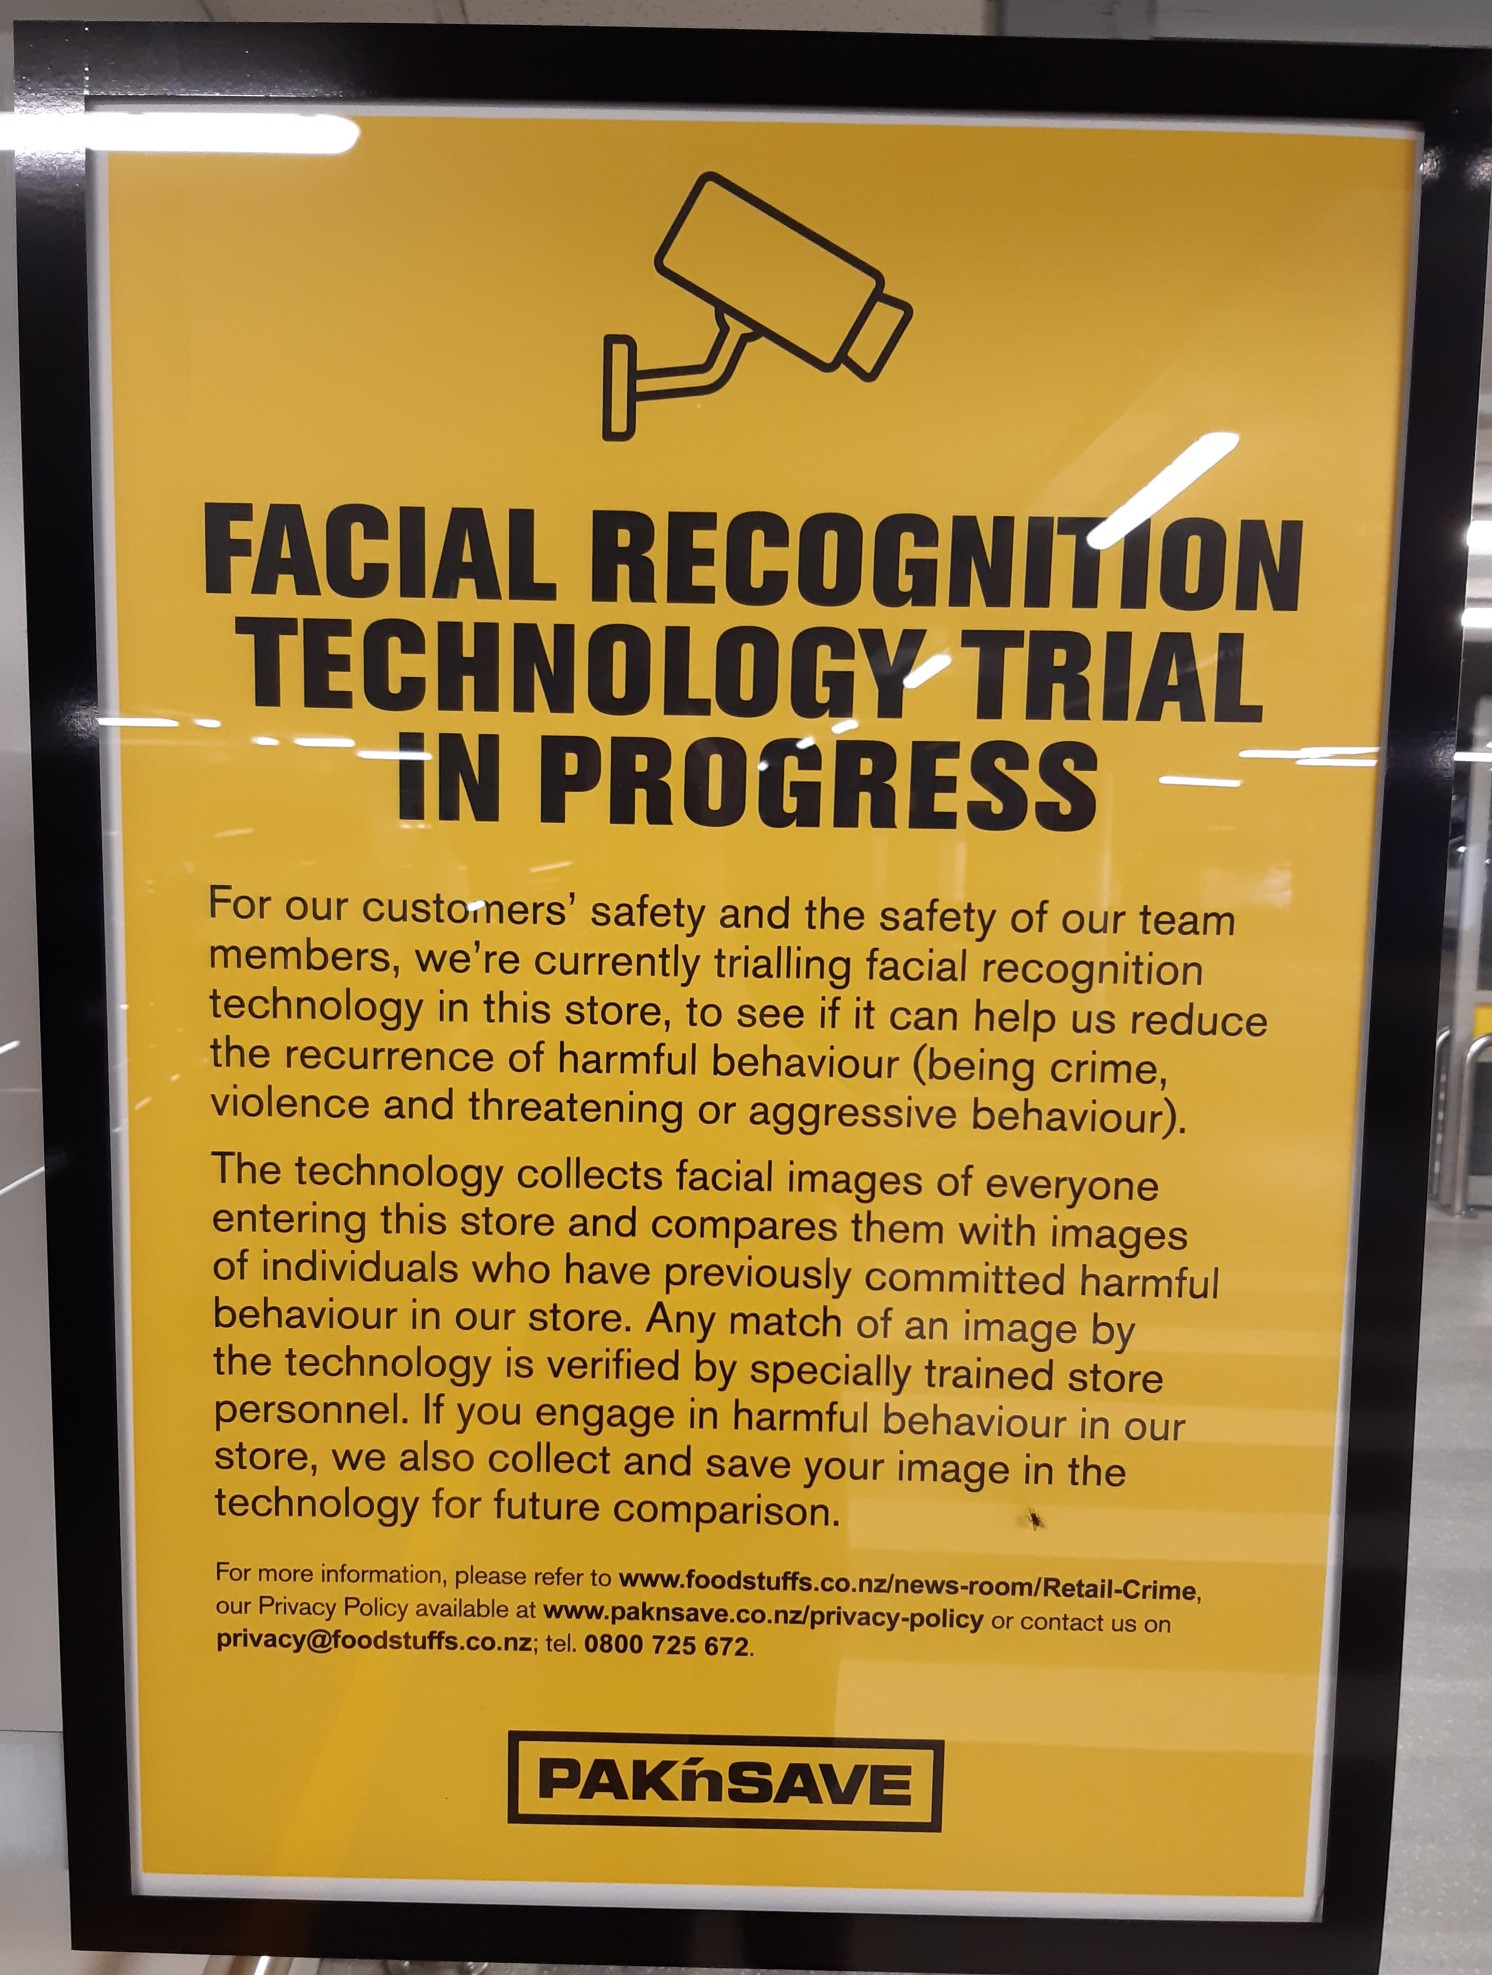 PAK'nSAVE facial recognition trial poster.